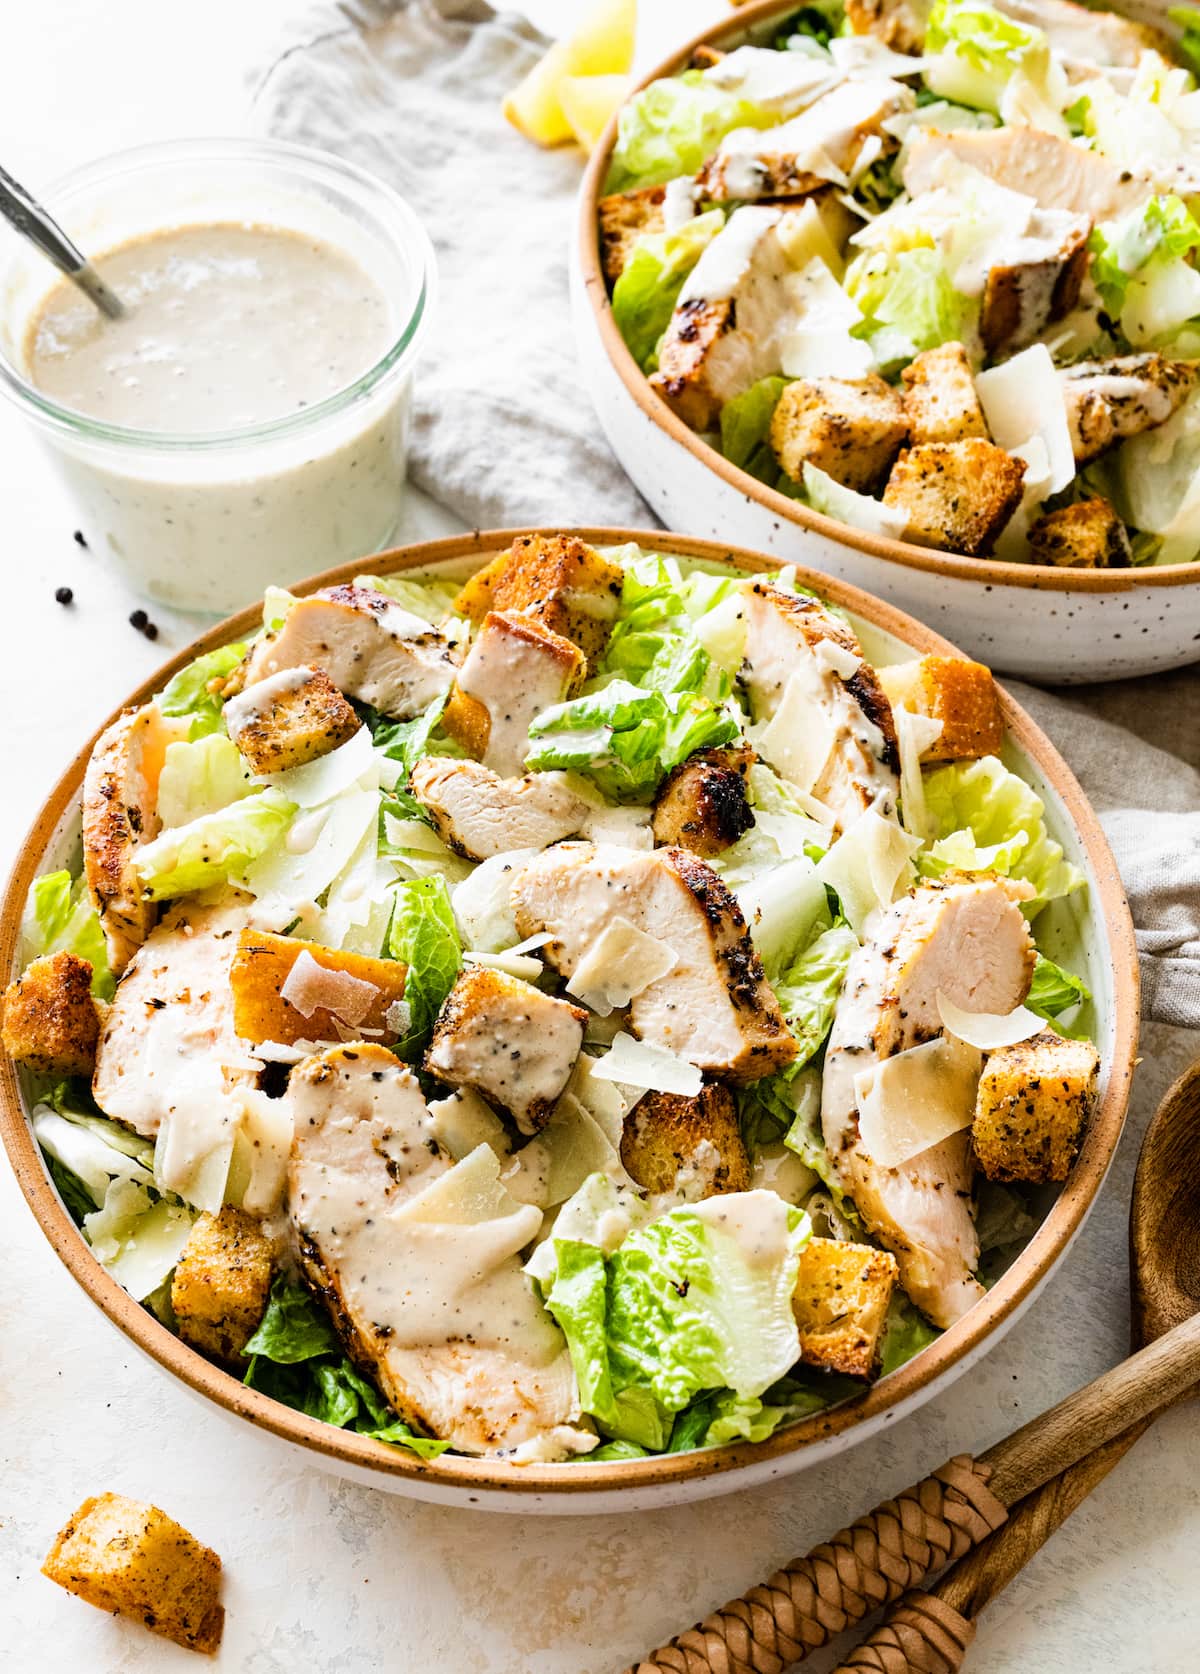 Grilled Chicken Caesar Salad in a bowl with two wooden serving spoons nearby.